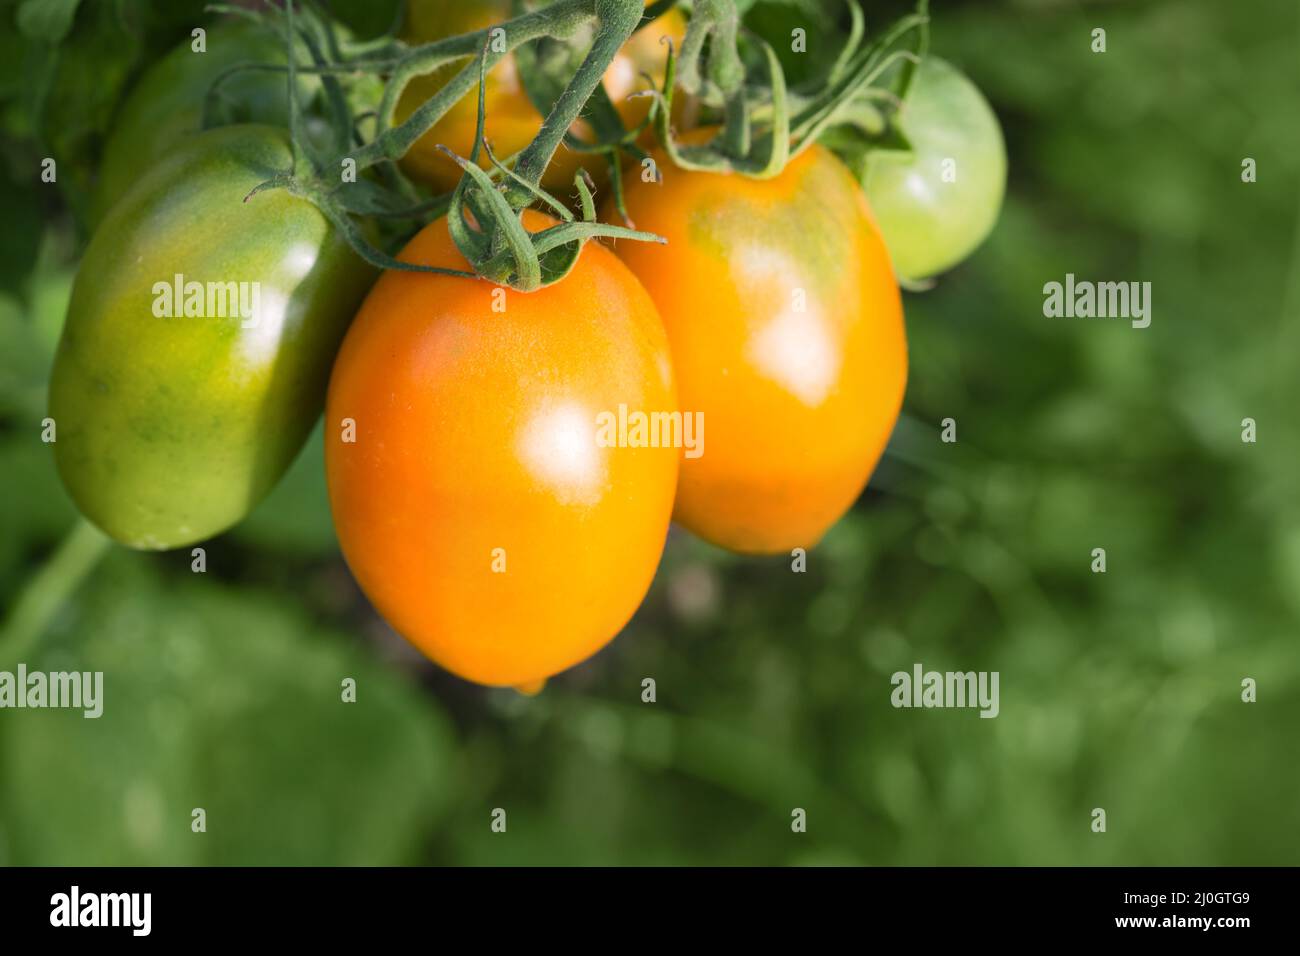 Farm of tasty yellow tomatoes on the bushes Stock Photo